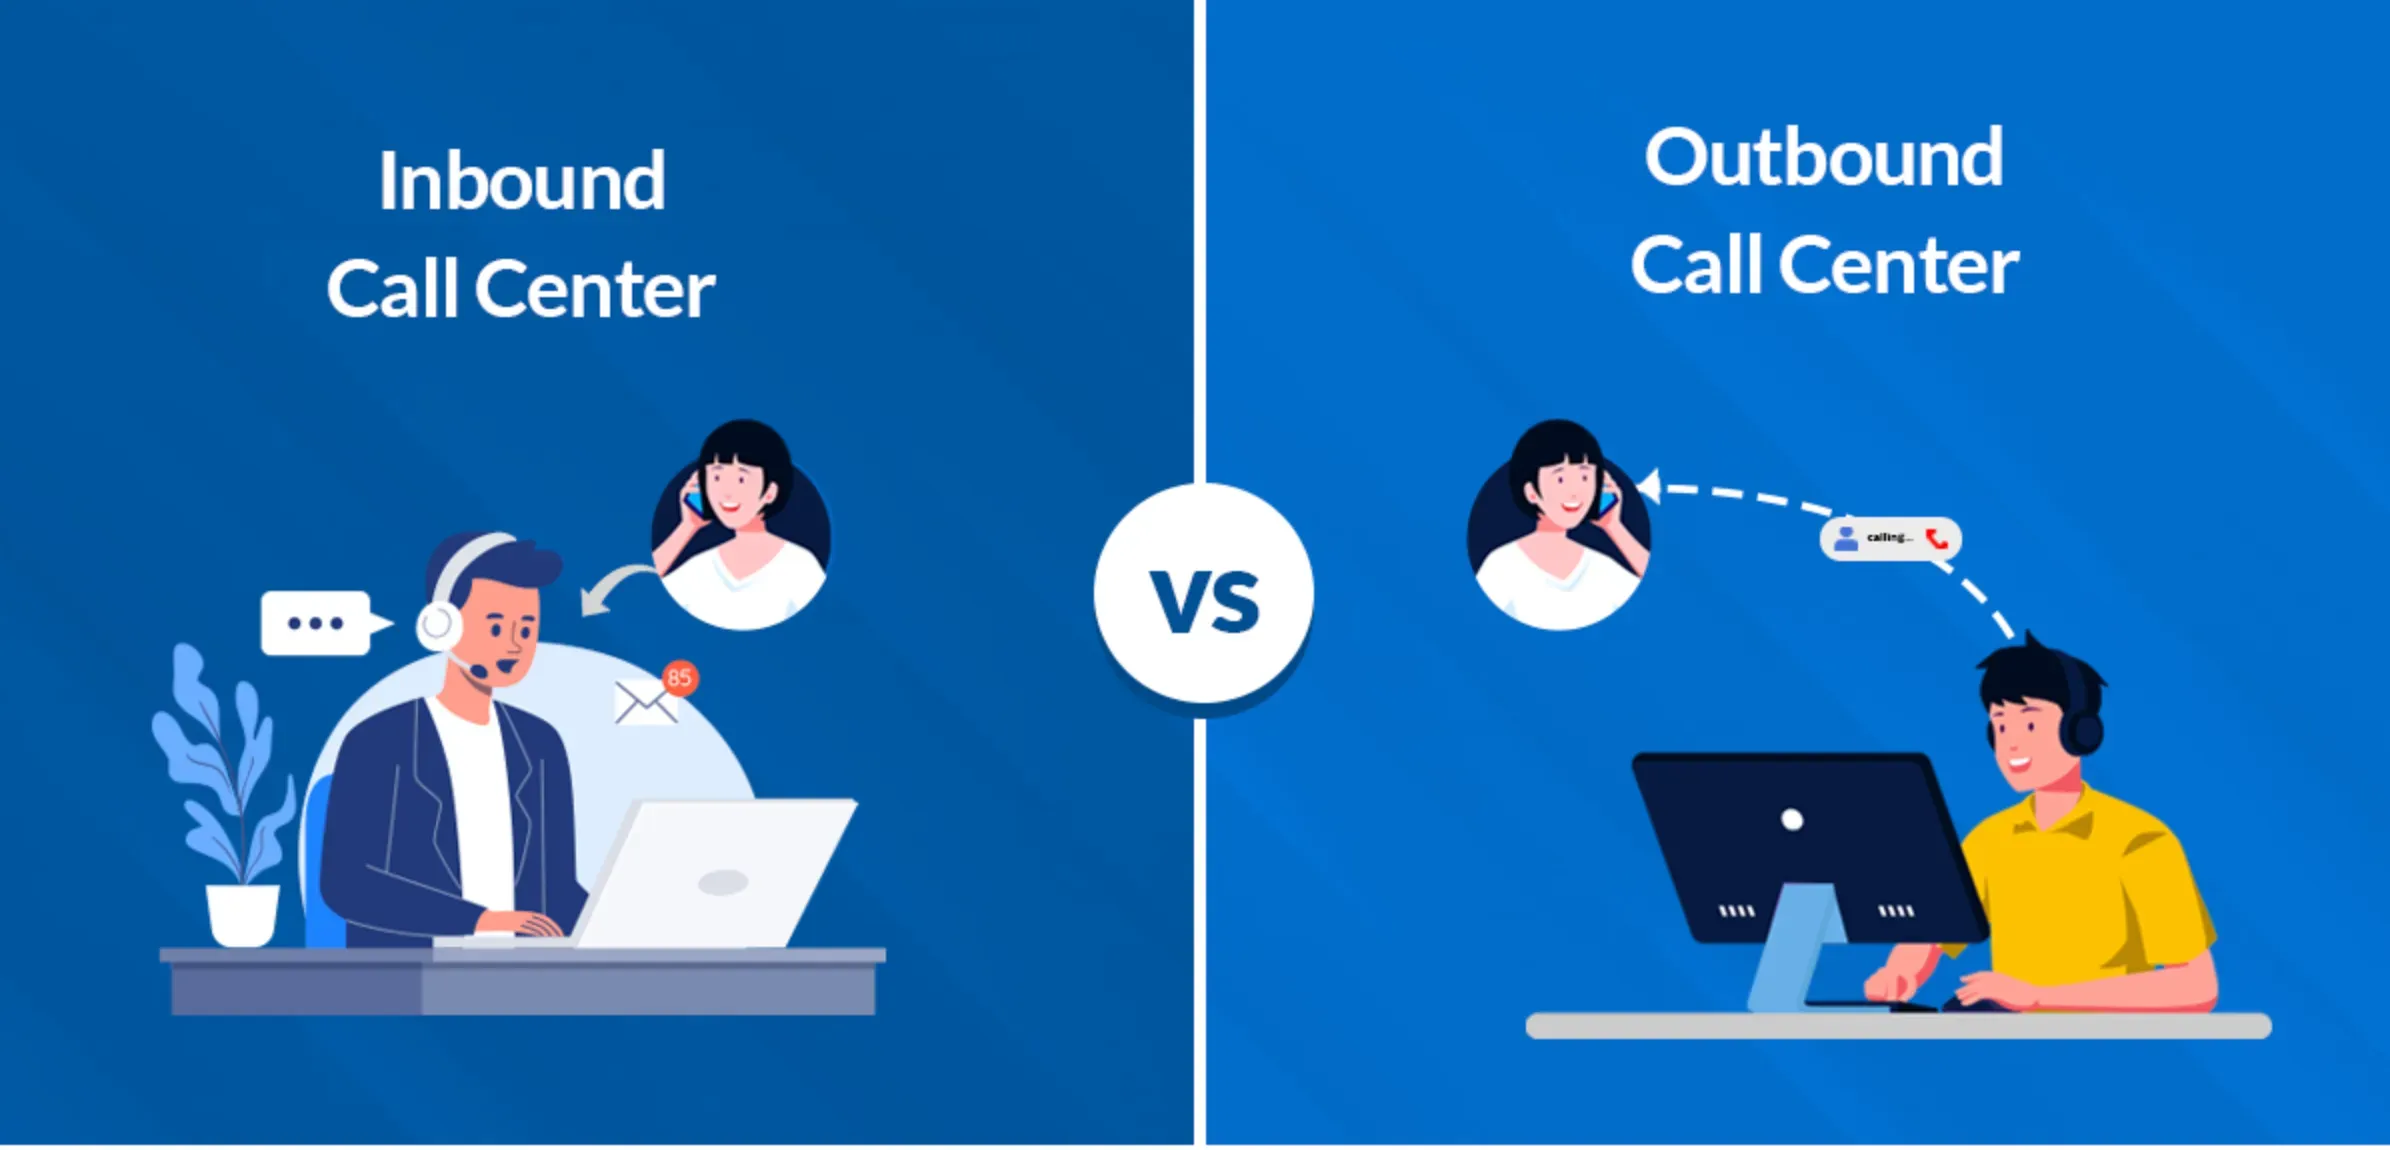 What is the difference between an Inbound and Outbound Call Center?